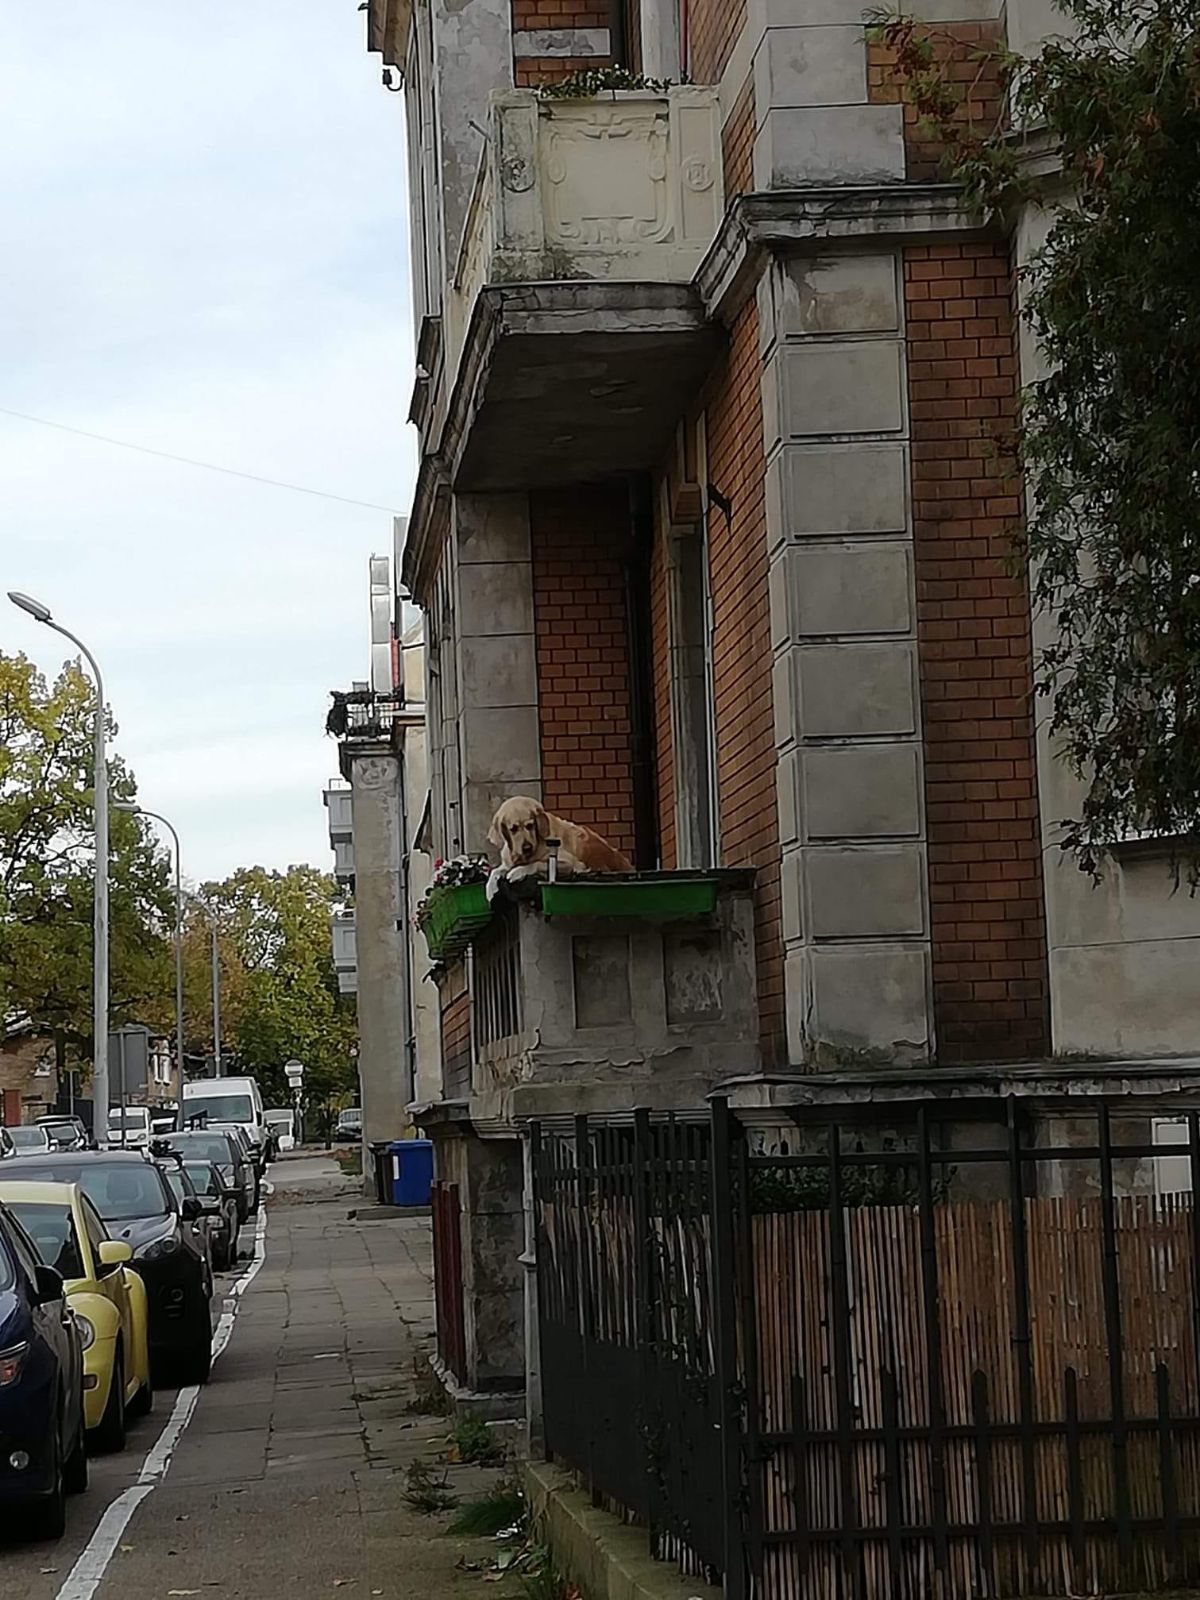 golden retriever hanging over a balcony with green pots with flowers